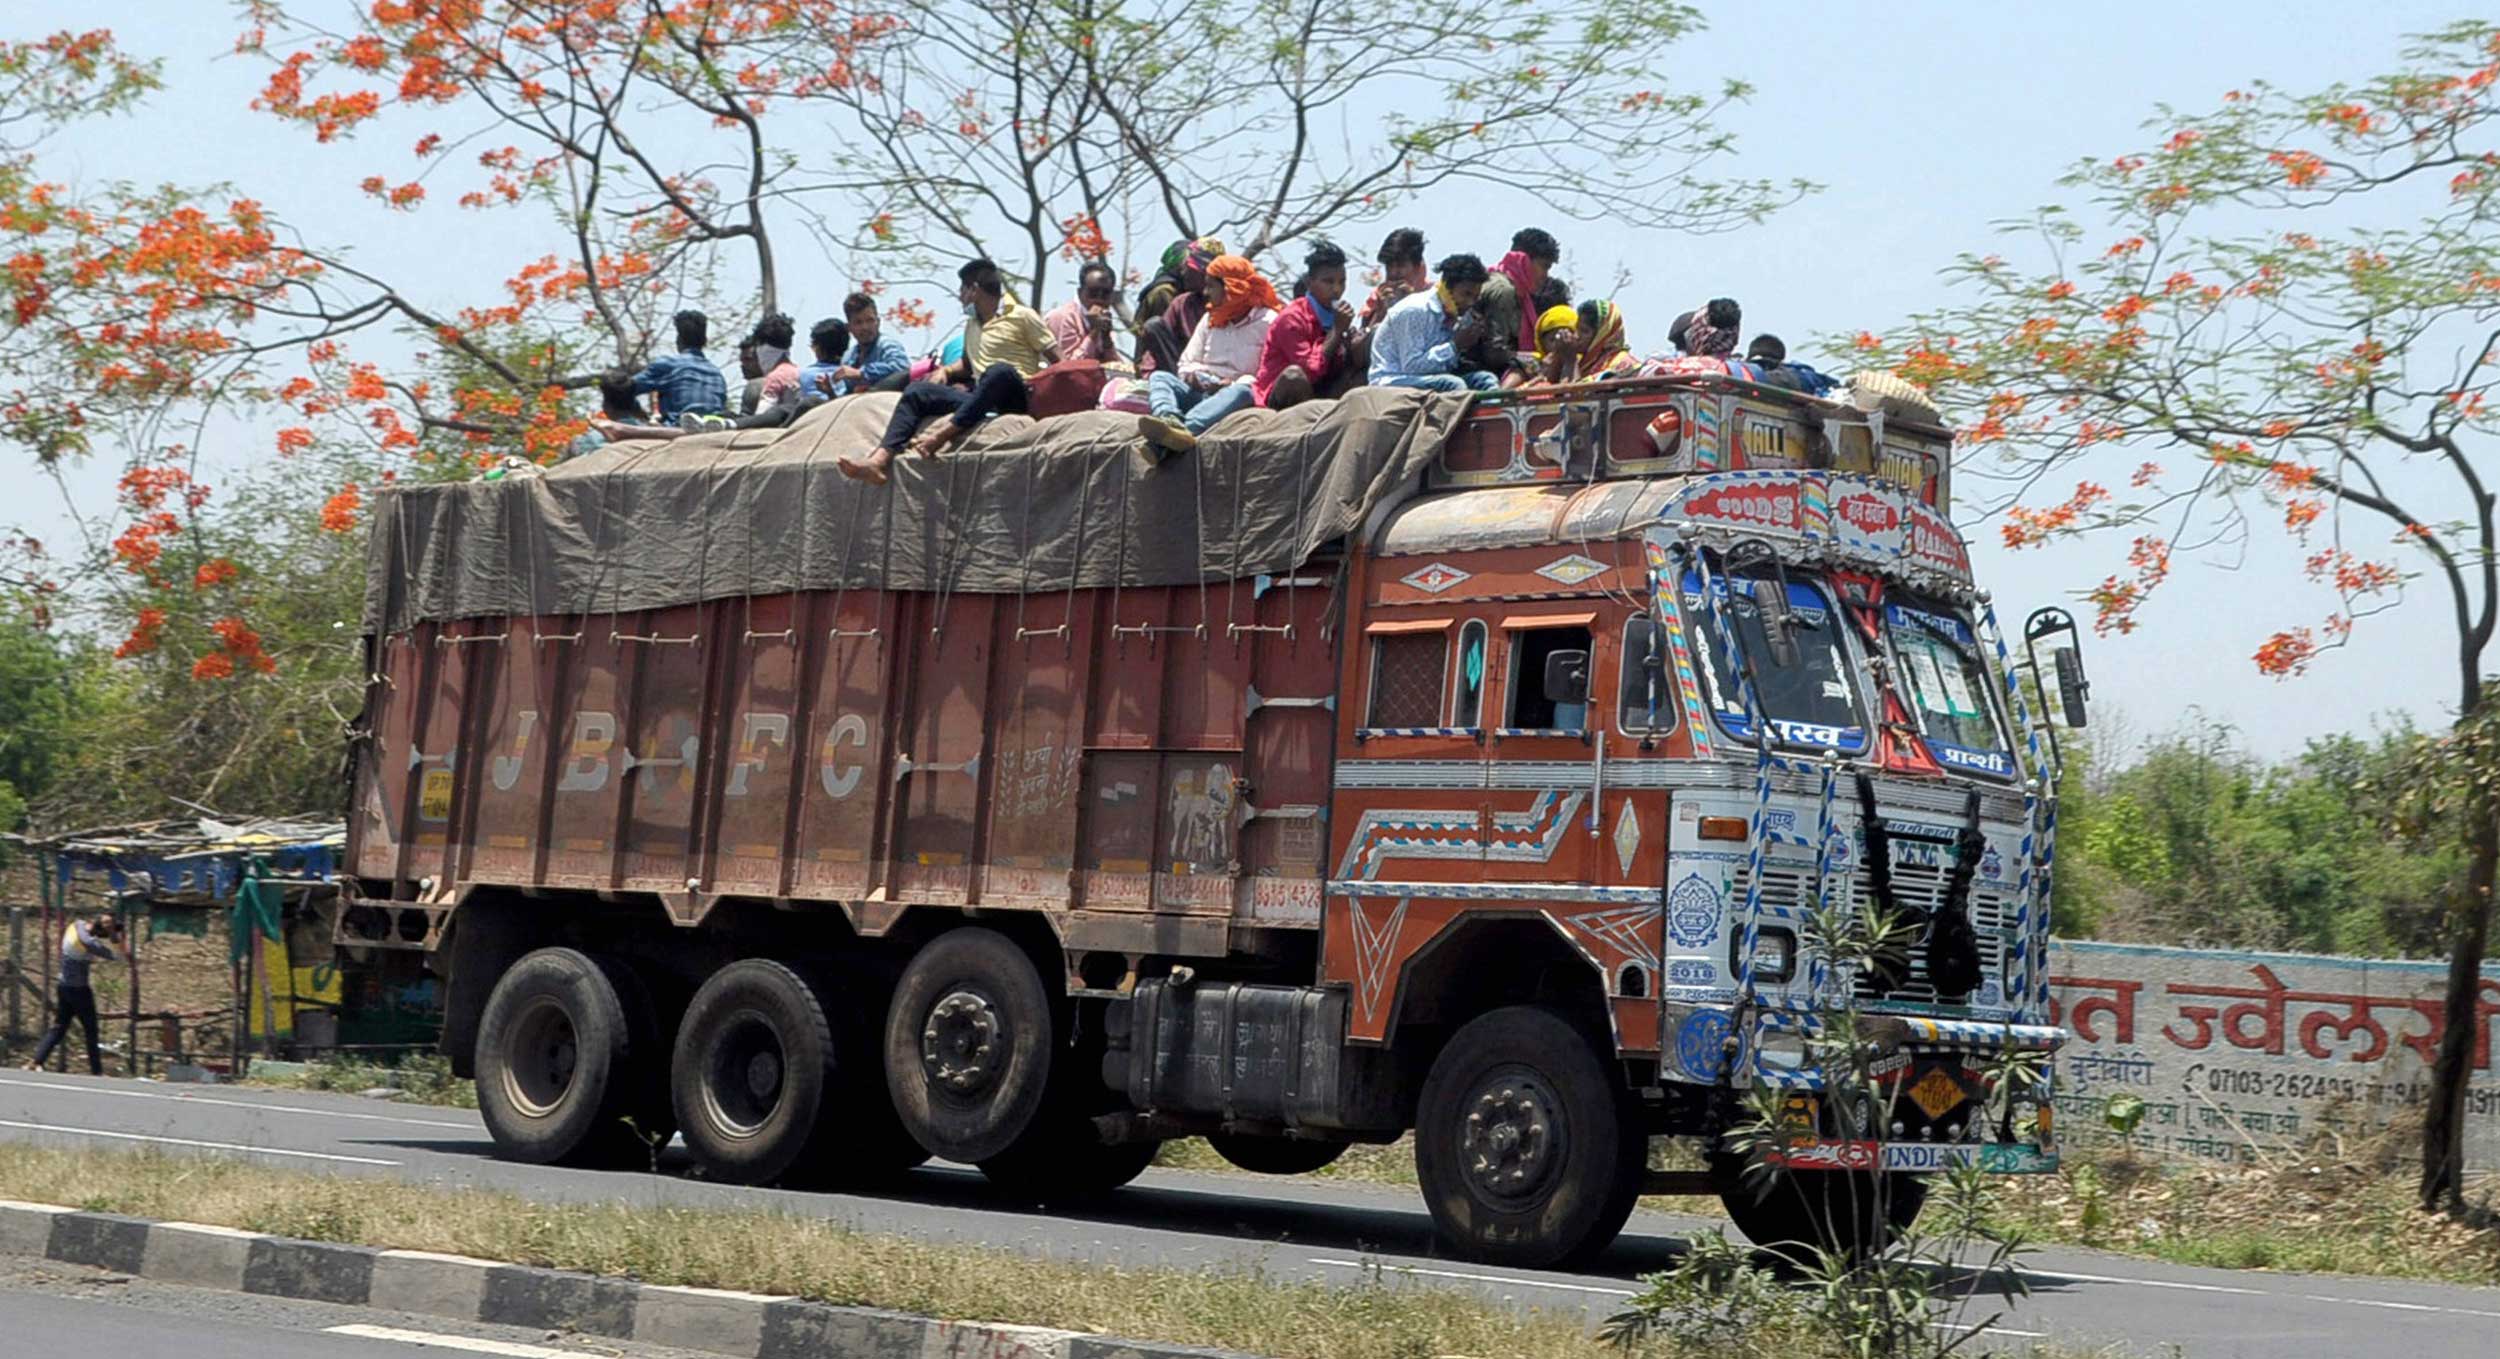 Trucks crammed with human cargo